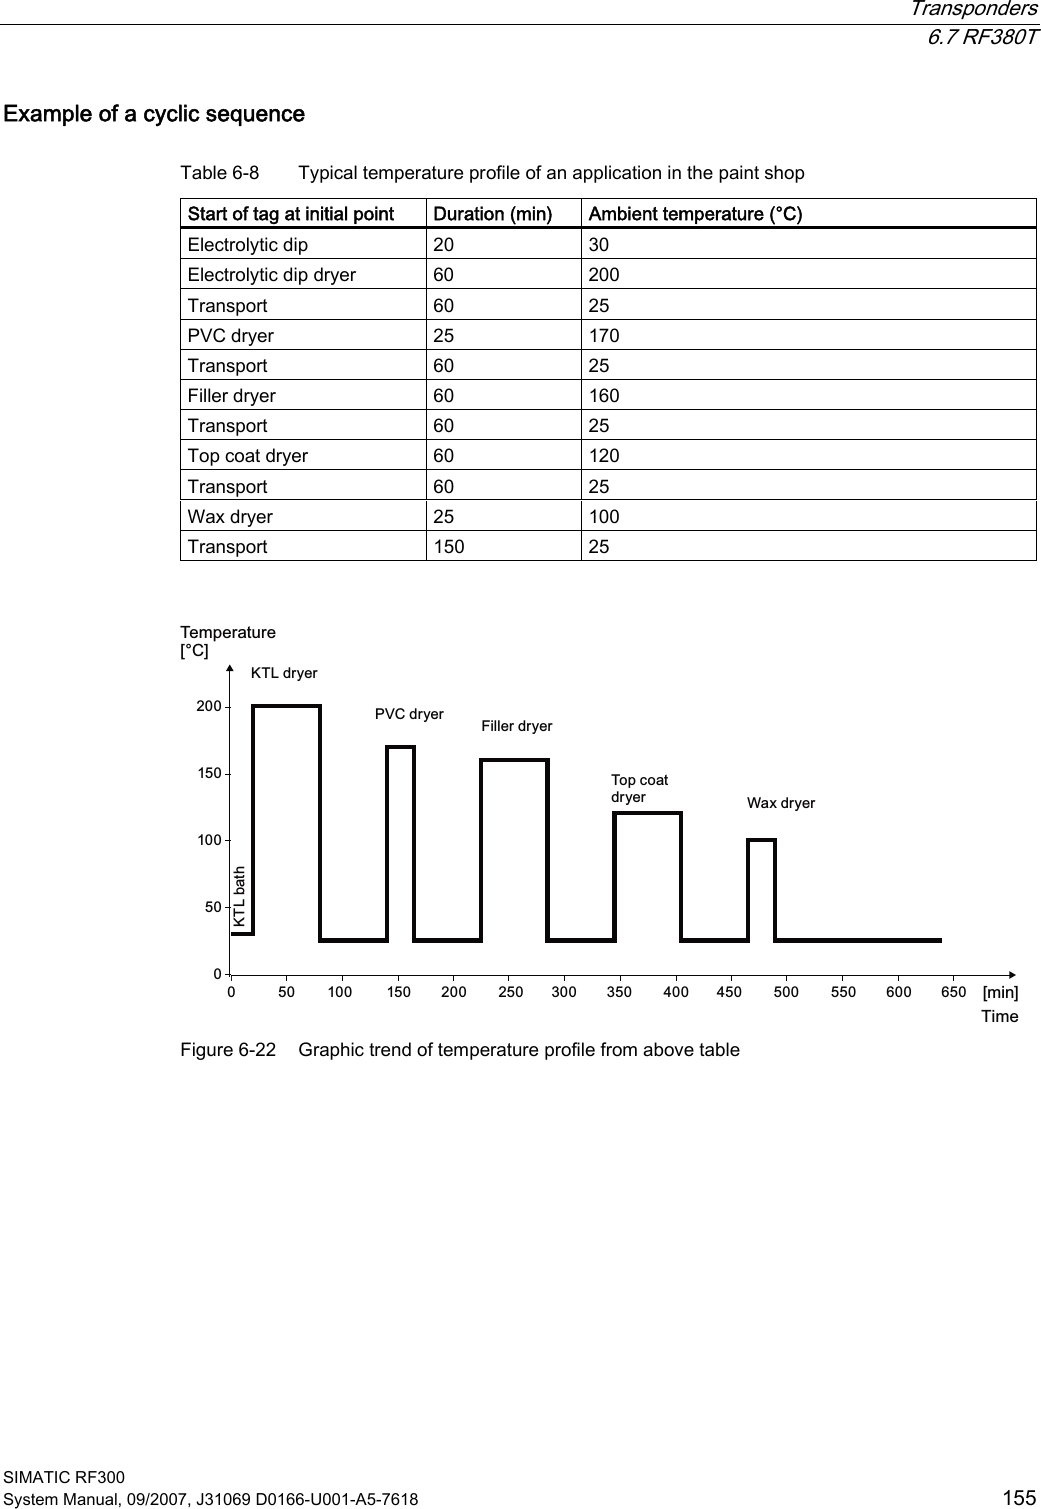  Transponders  6.7 RF380T SIMATIC RF300 System Manual, 09/2007, J31069 D0166-U001-A5-7618  155 Example of a cyclic sequence Table 6-8  Typical temperature profile of an application in the paint shop Start of tag at initial point  Duration (min)  Ambient temperature (°C) Electrolytic dip  20  30 Electrolytic dip dryer  60  200 Transport  60  25 PVC dryer  25  170 Transport  60  25 Filler dryer  60  160 Transport  60  25 Top coat dryer  60  120 Transport  60  25 Wax dryer  25  100 Transport  150  25  7HPSHUDWXUH.7/EDWK7LPH.7/GU\HU39&amp;GU\HU )LOOHUGU\HU7RSFRDWGU\HU :D[GU\HU&gt;PLQ@&gt;r&amp;@             Figure 6-22  Graphic trend of temperature profile from above table 